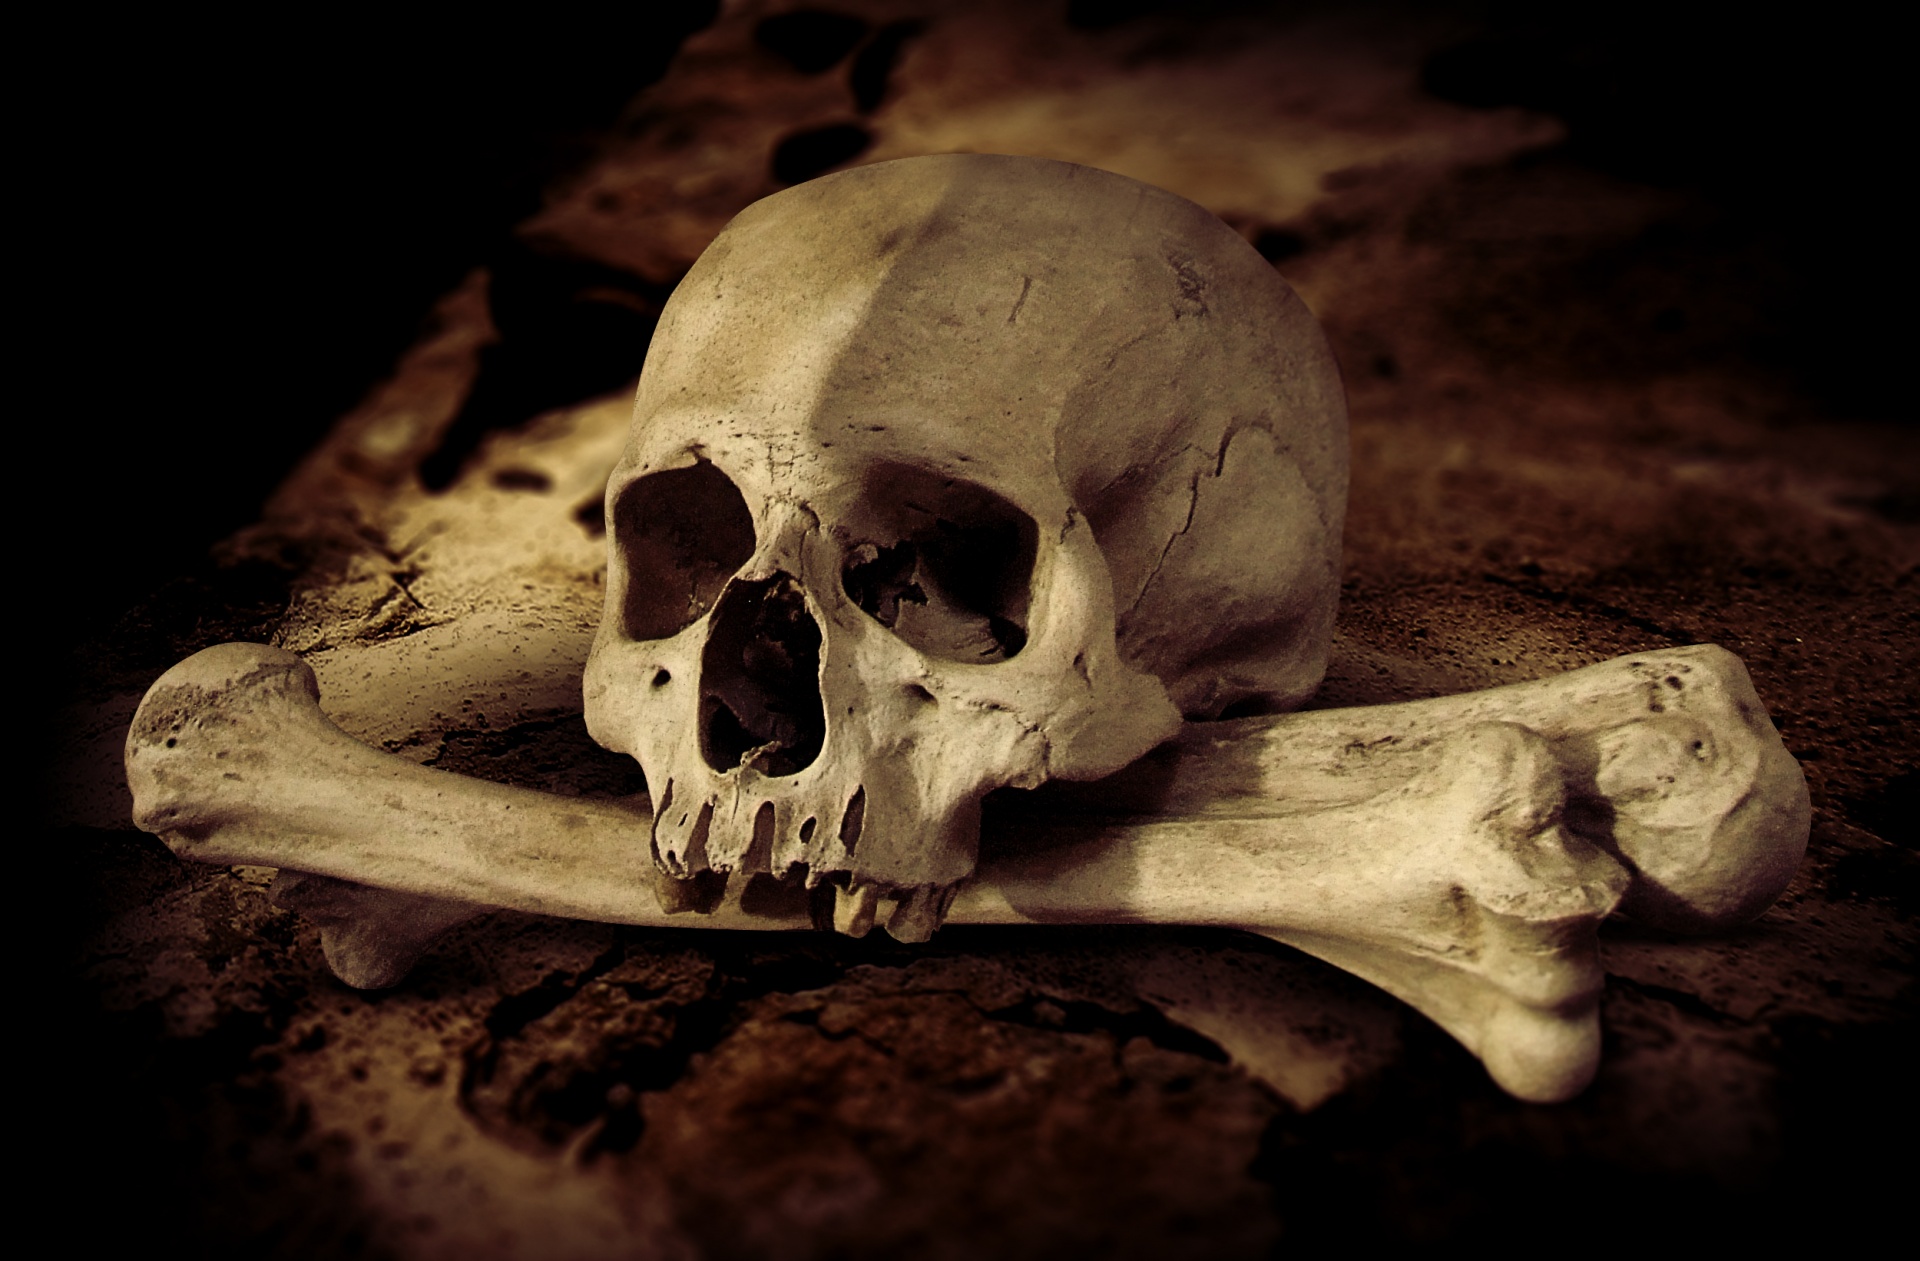 Real human skull and crossbones on a stone background, halloween horror scene